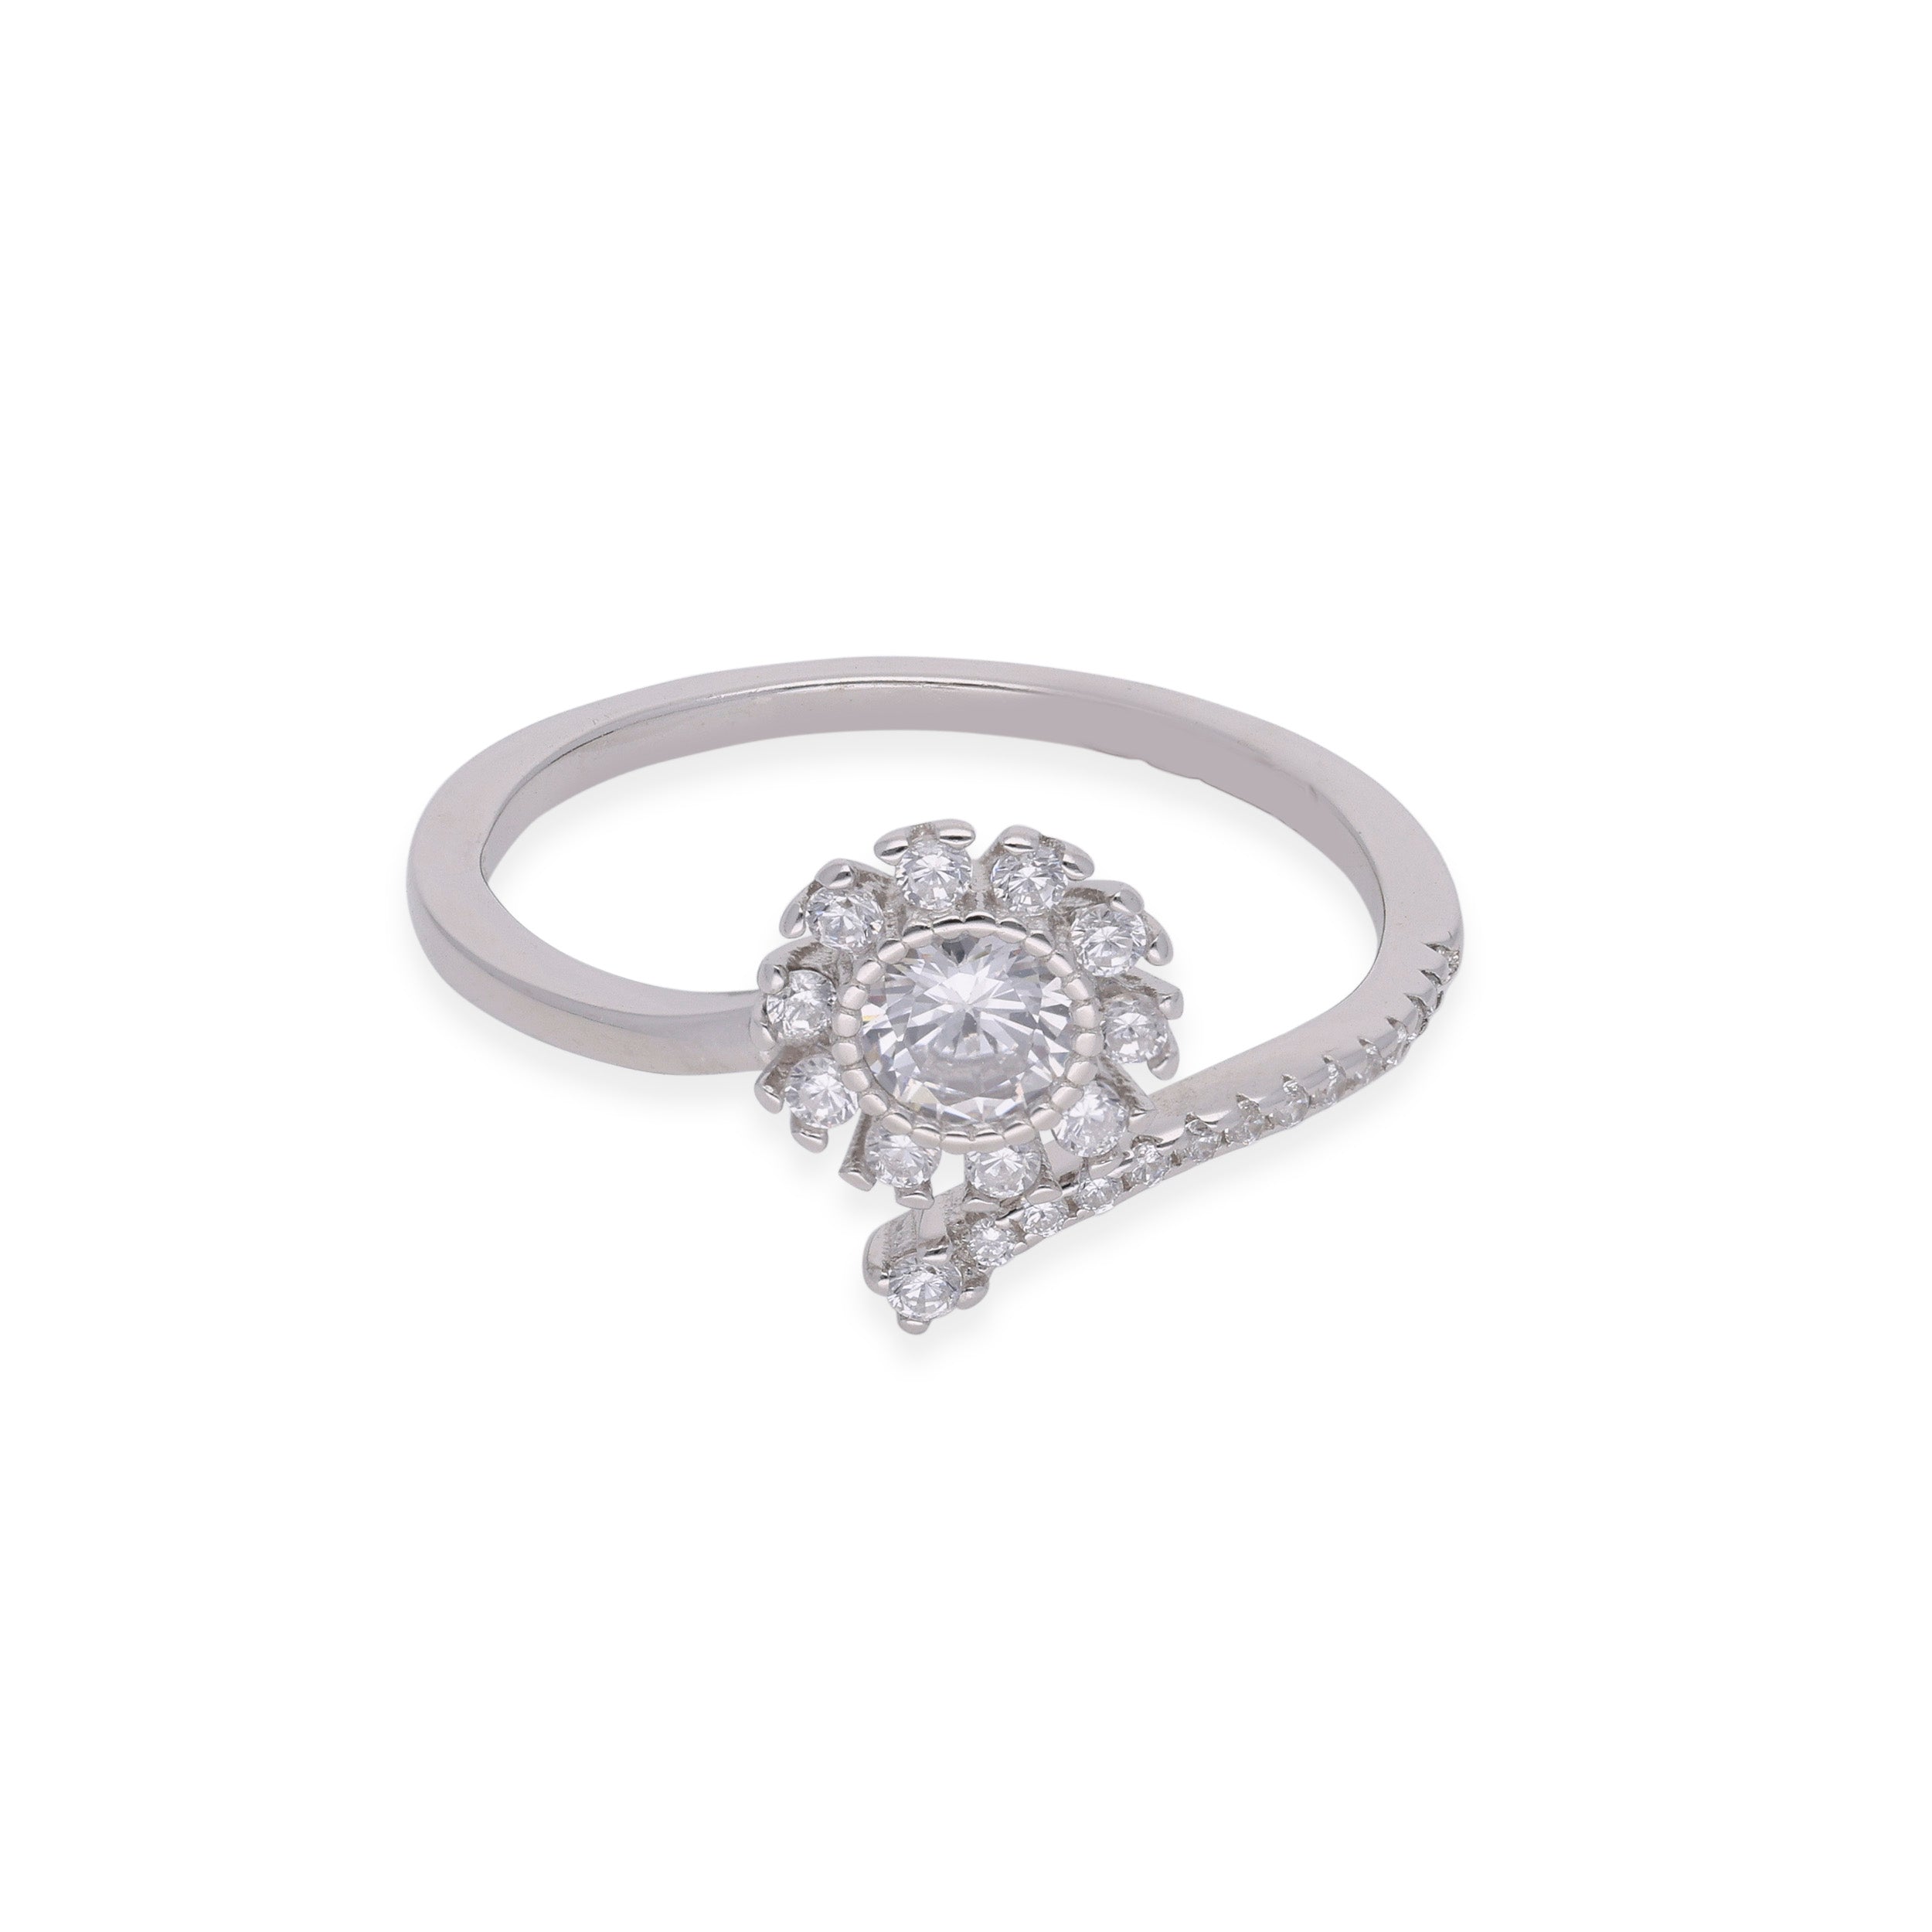 Solitaire Diamond Accent Engagement Ring | SKU : 0003116203